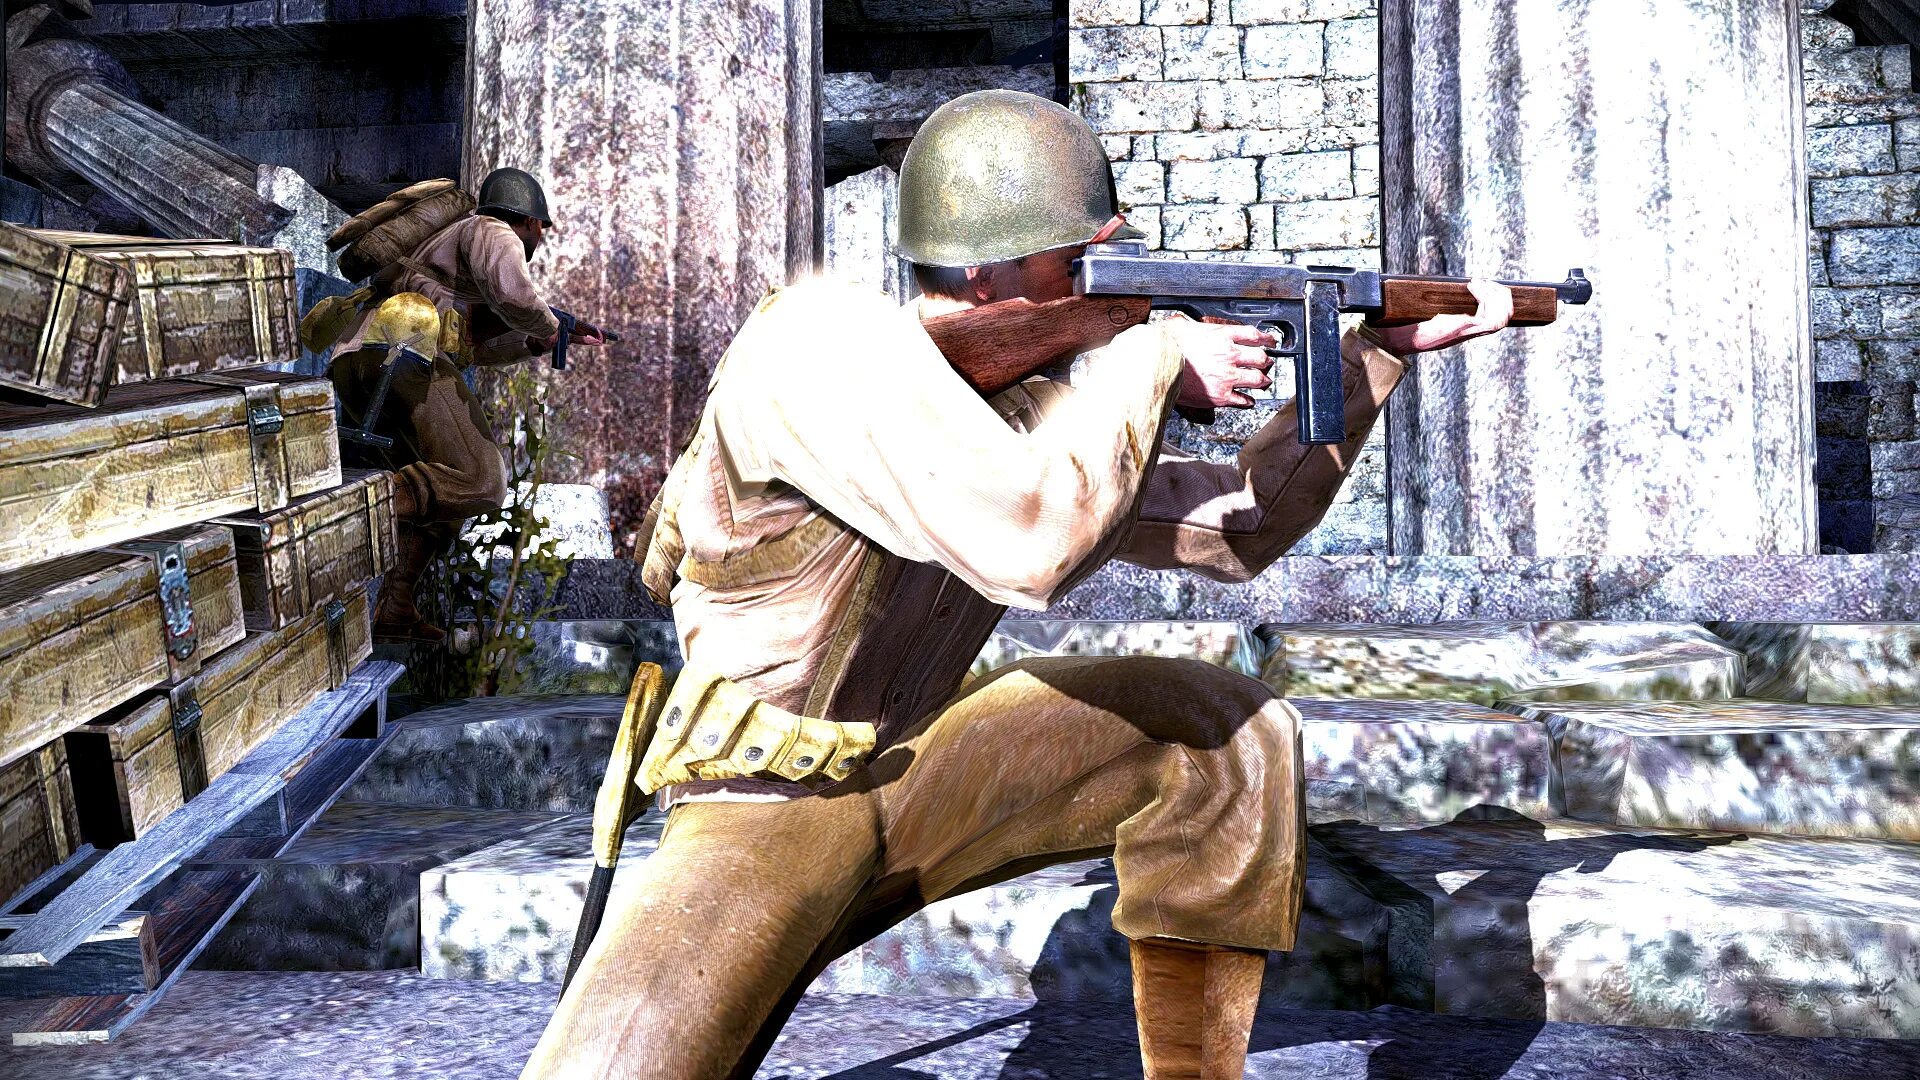 2 30 games. Medal of Honor Airborne 2. Medal of Honor Airborne. Medal of Honor Airborne Waffen SS. Medal of Honor ww2.